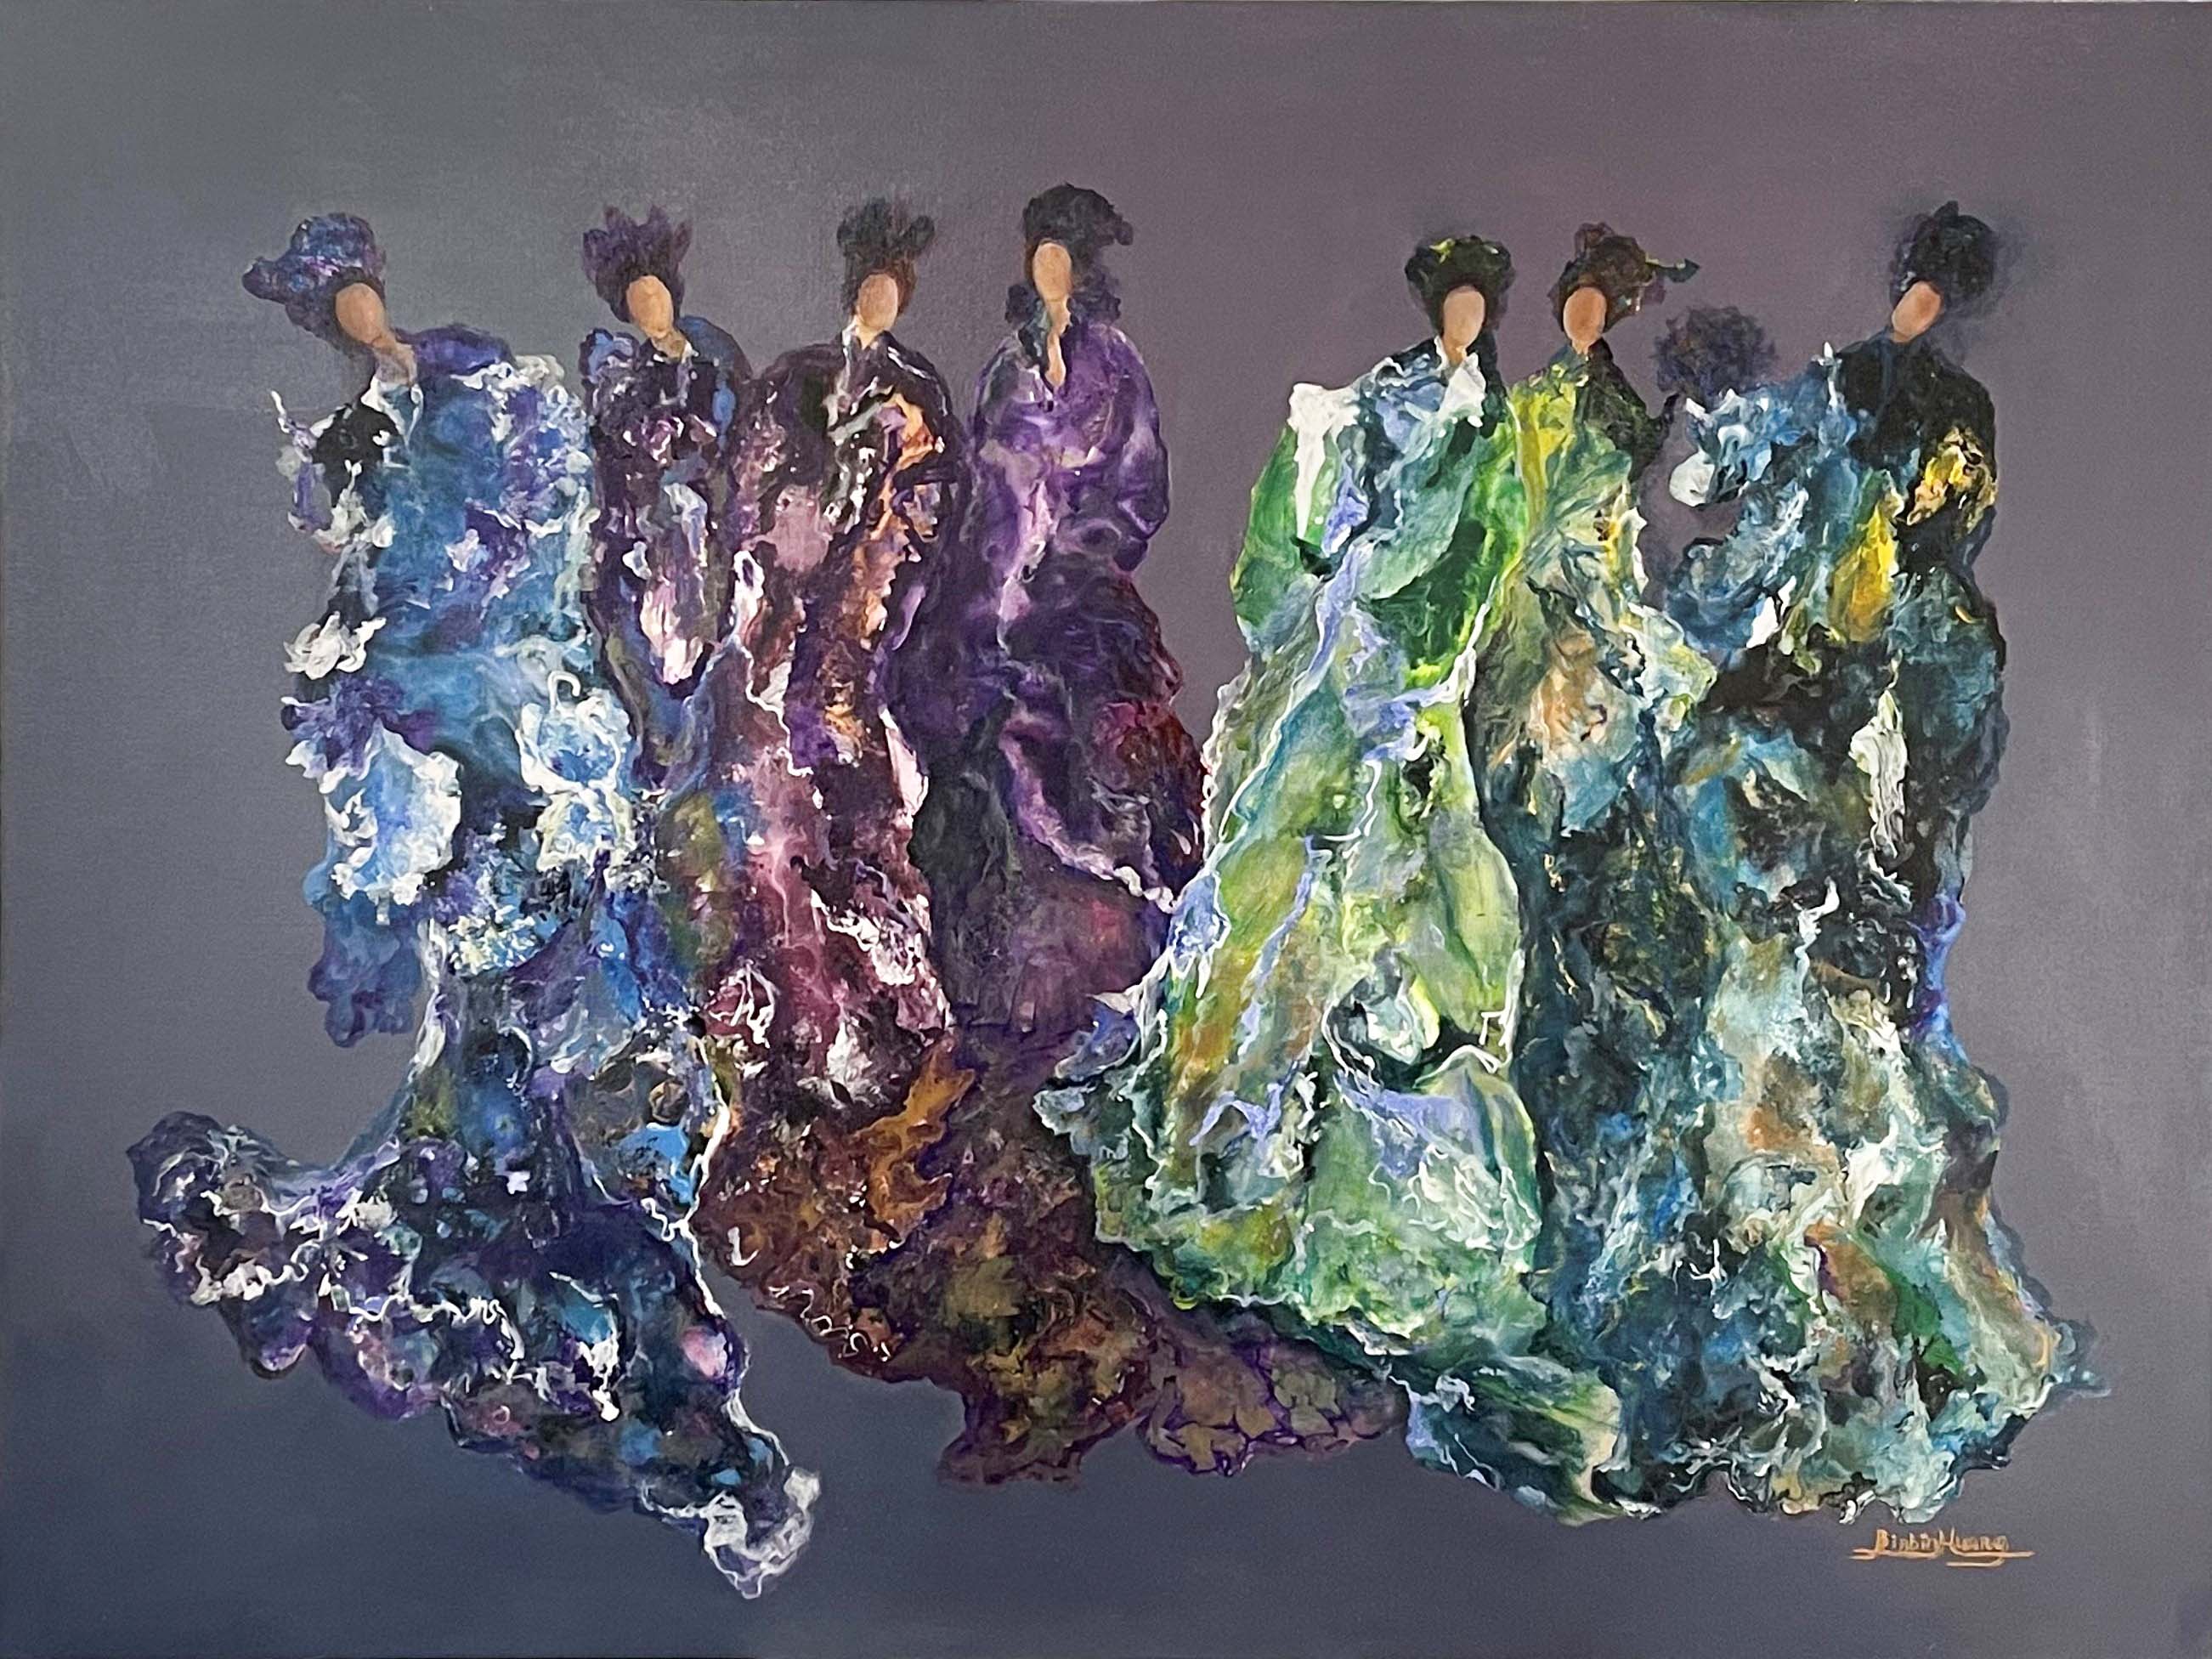 Contemporary Art. Title: 7 Goddesses, Mixed Media, 36x48 in by Canadian artist Binbin Huang.